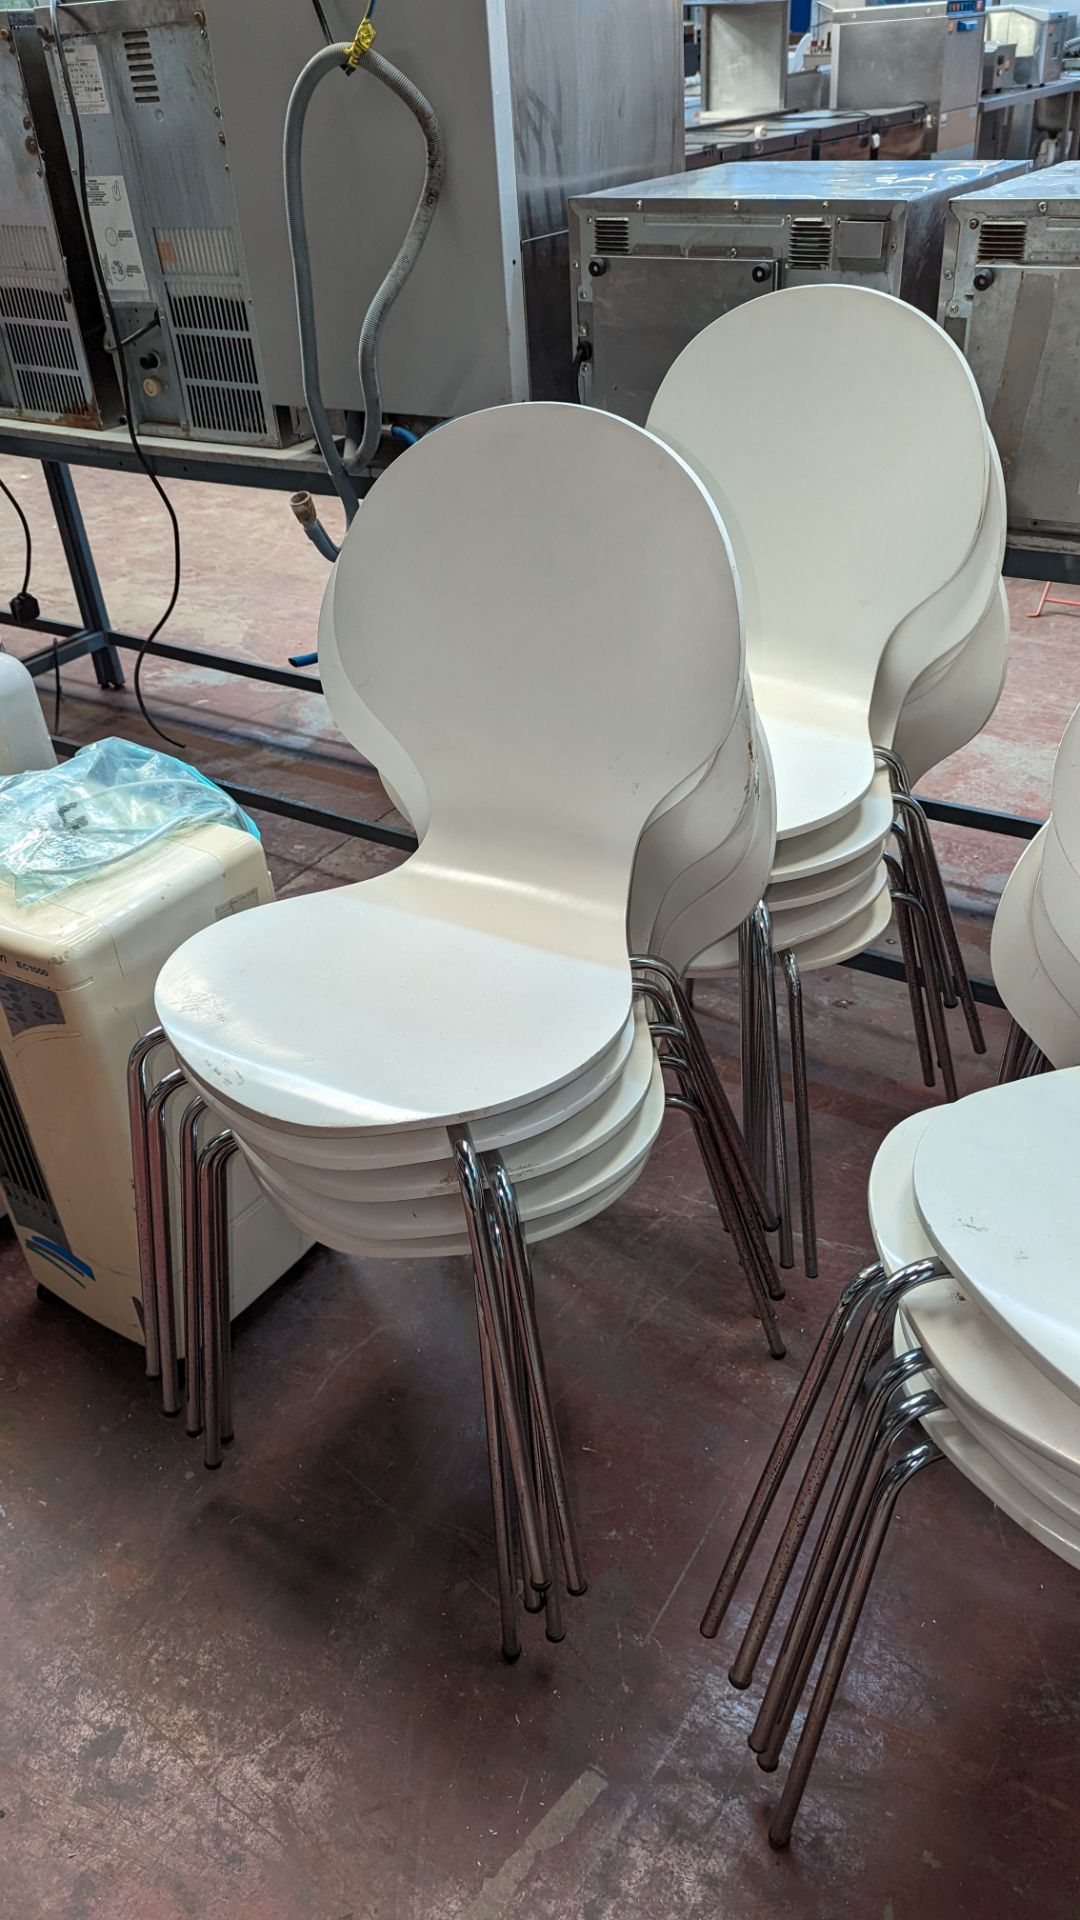 20 matching stacking chairs in white painted wood on chrome bases - Image 4 of 6